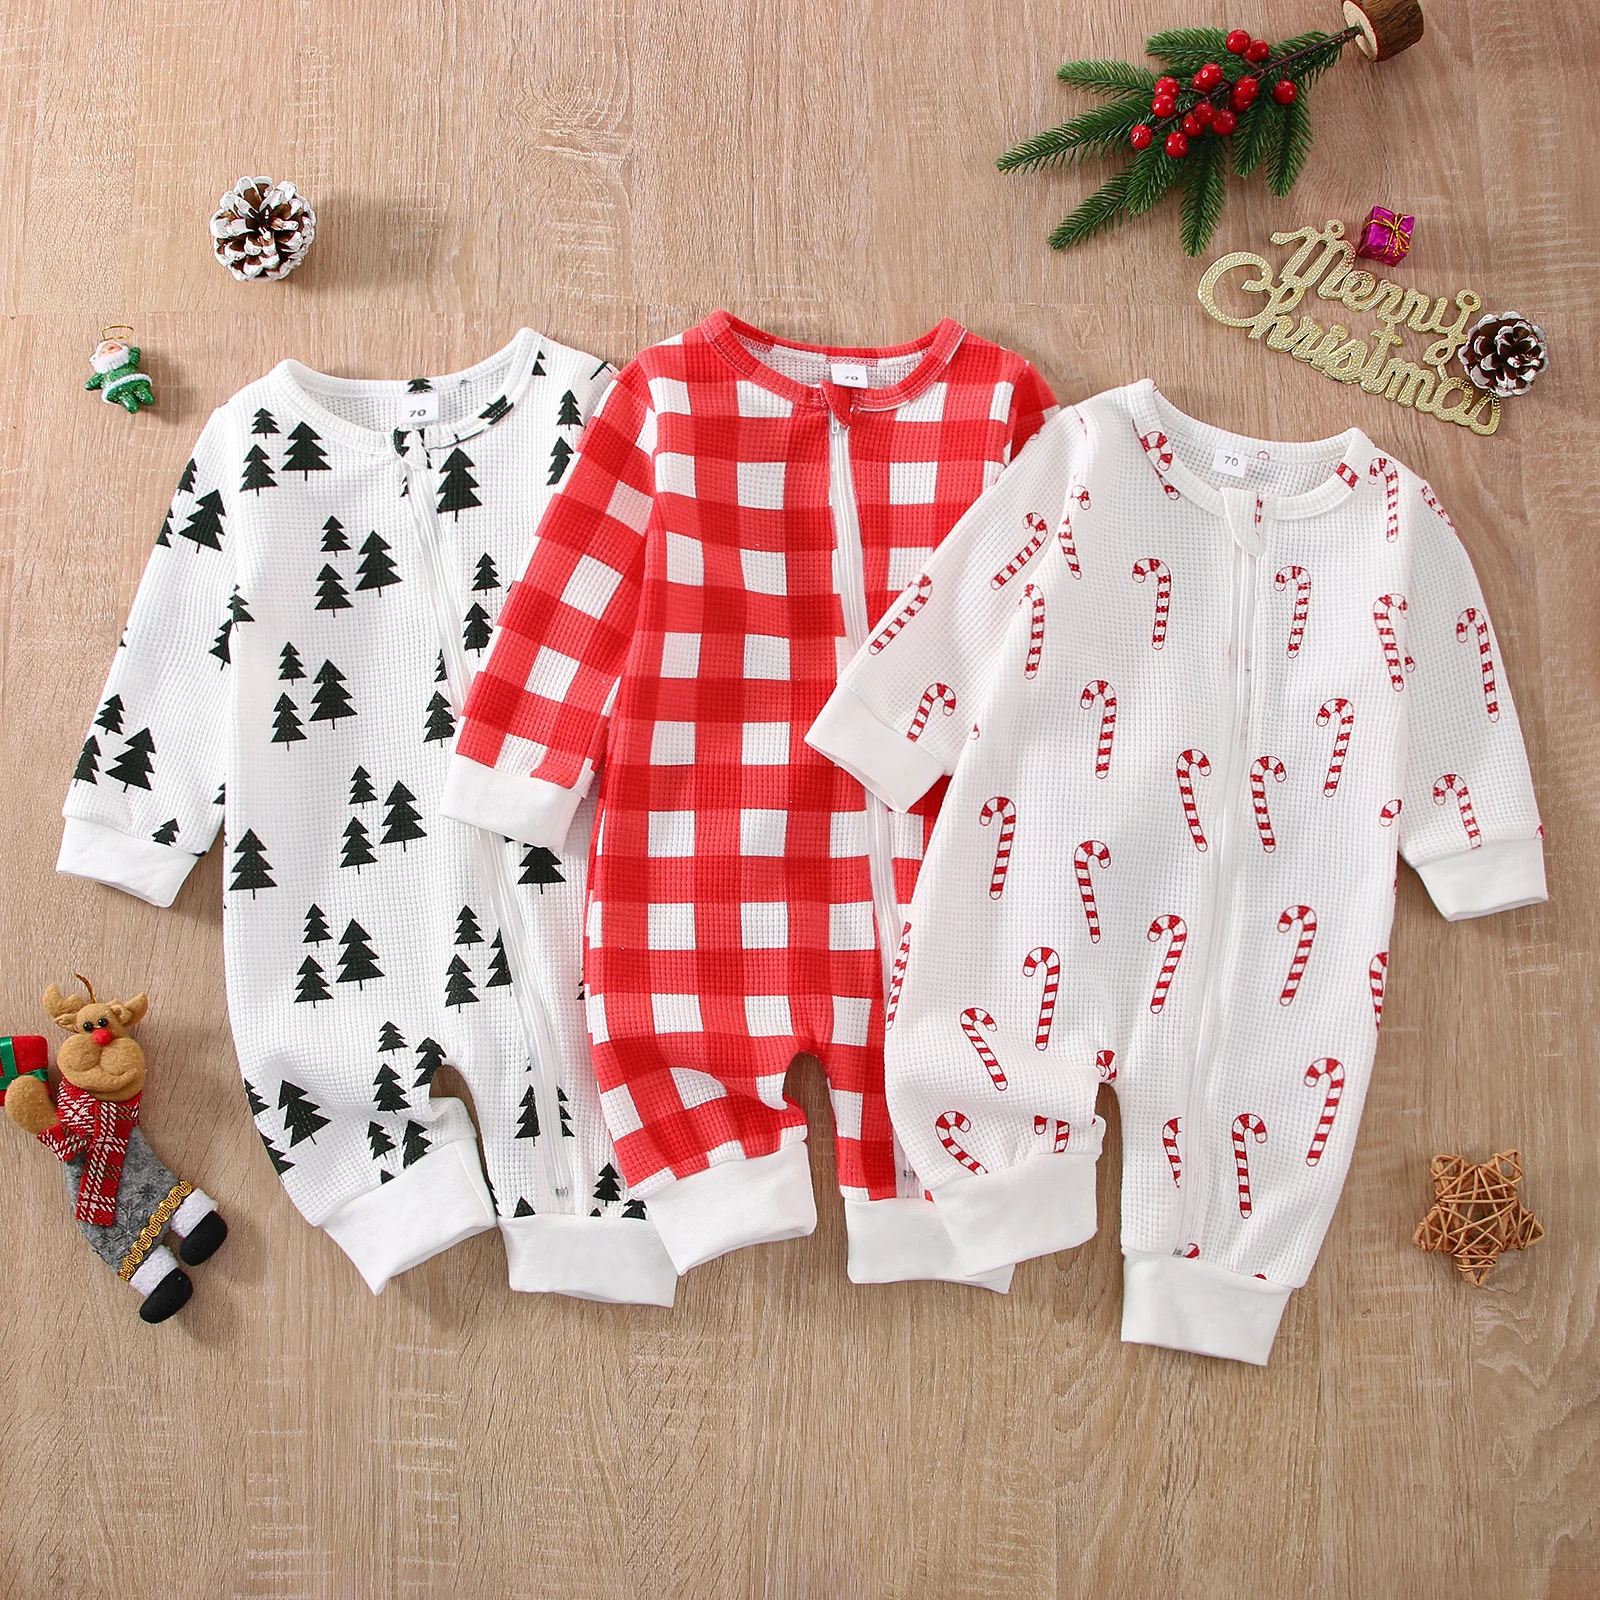 

Christmas Baby Jumpsuit Toddler Boy Girl Long Sleeve Zipper Romper Xmas Clothing Costumes for 0-18M Newborn Infants